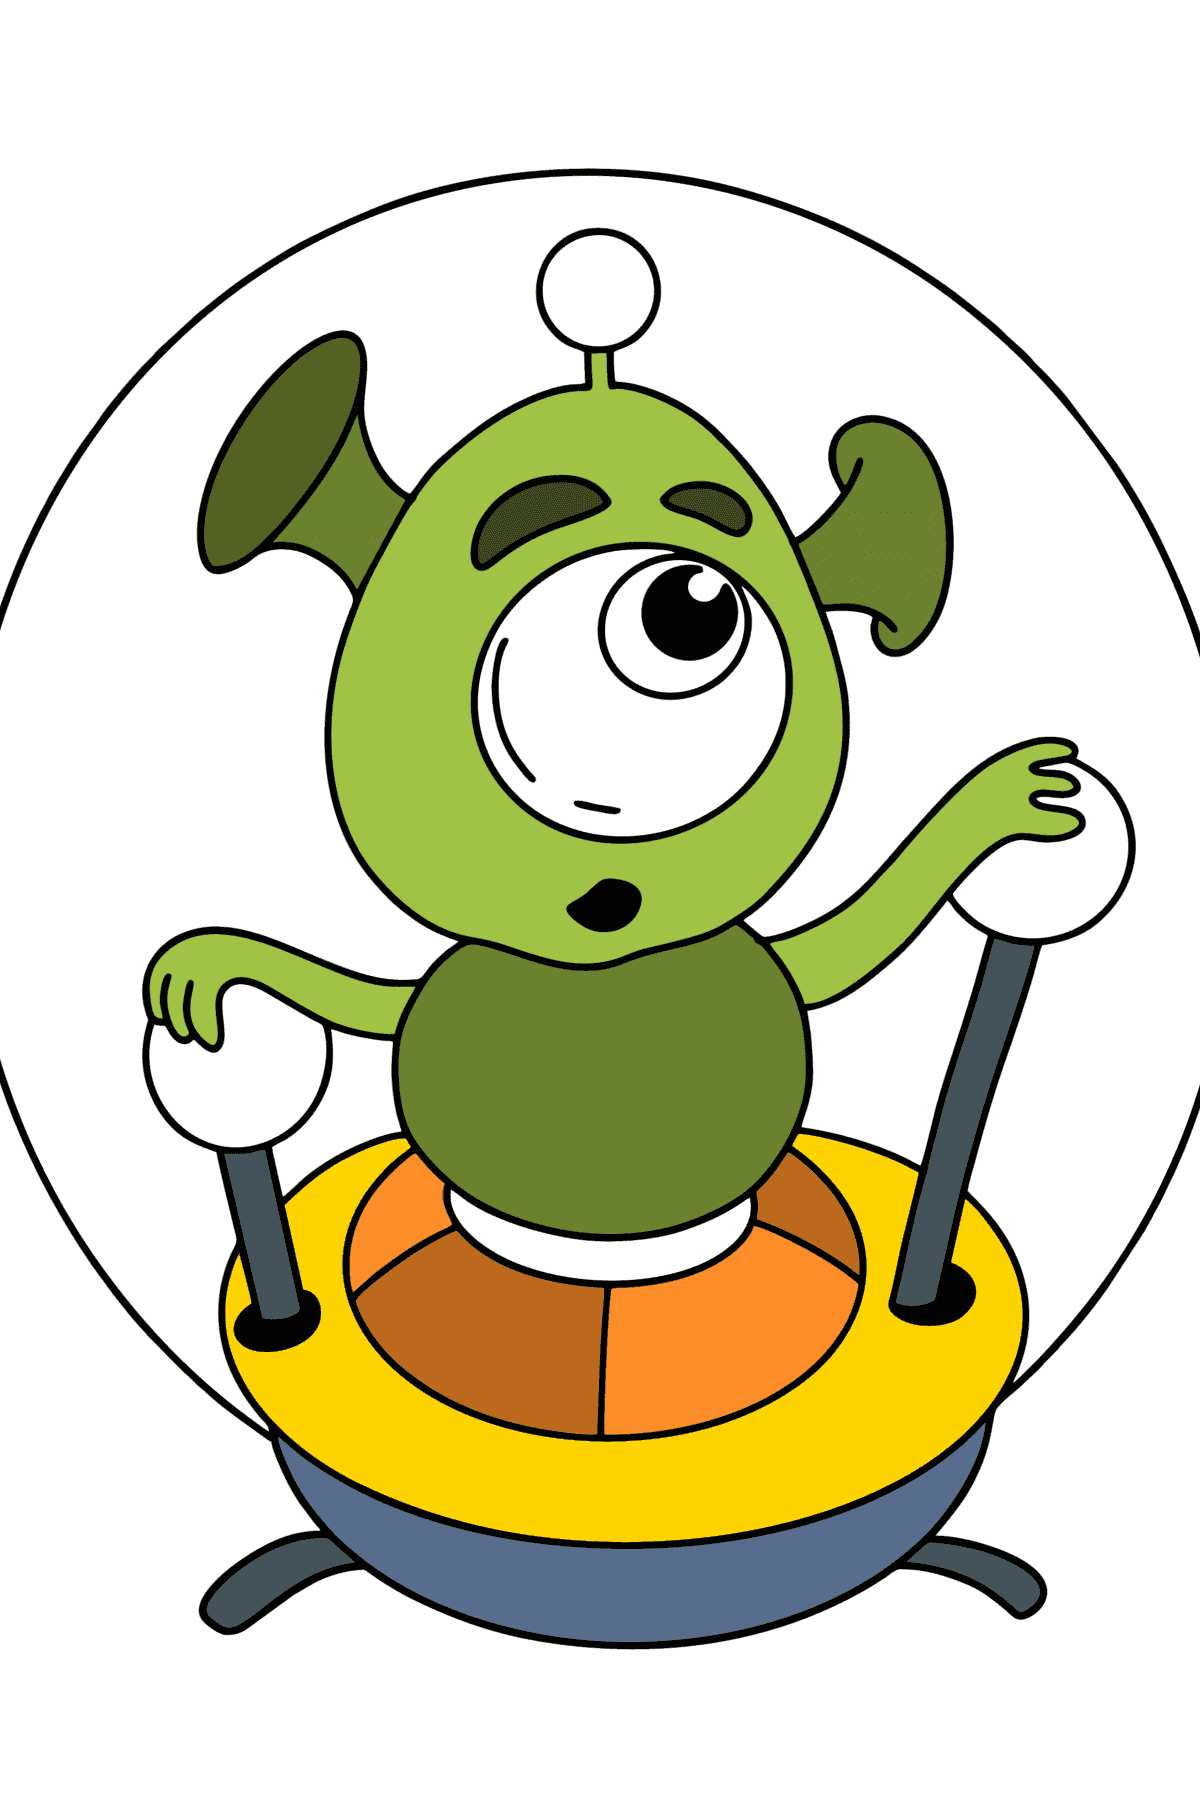 Baby Alien coloring pages - Coloring Pages for Kids